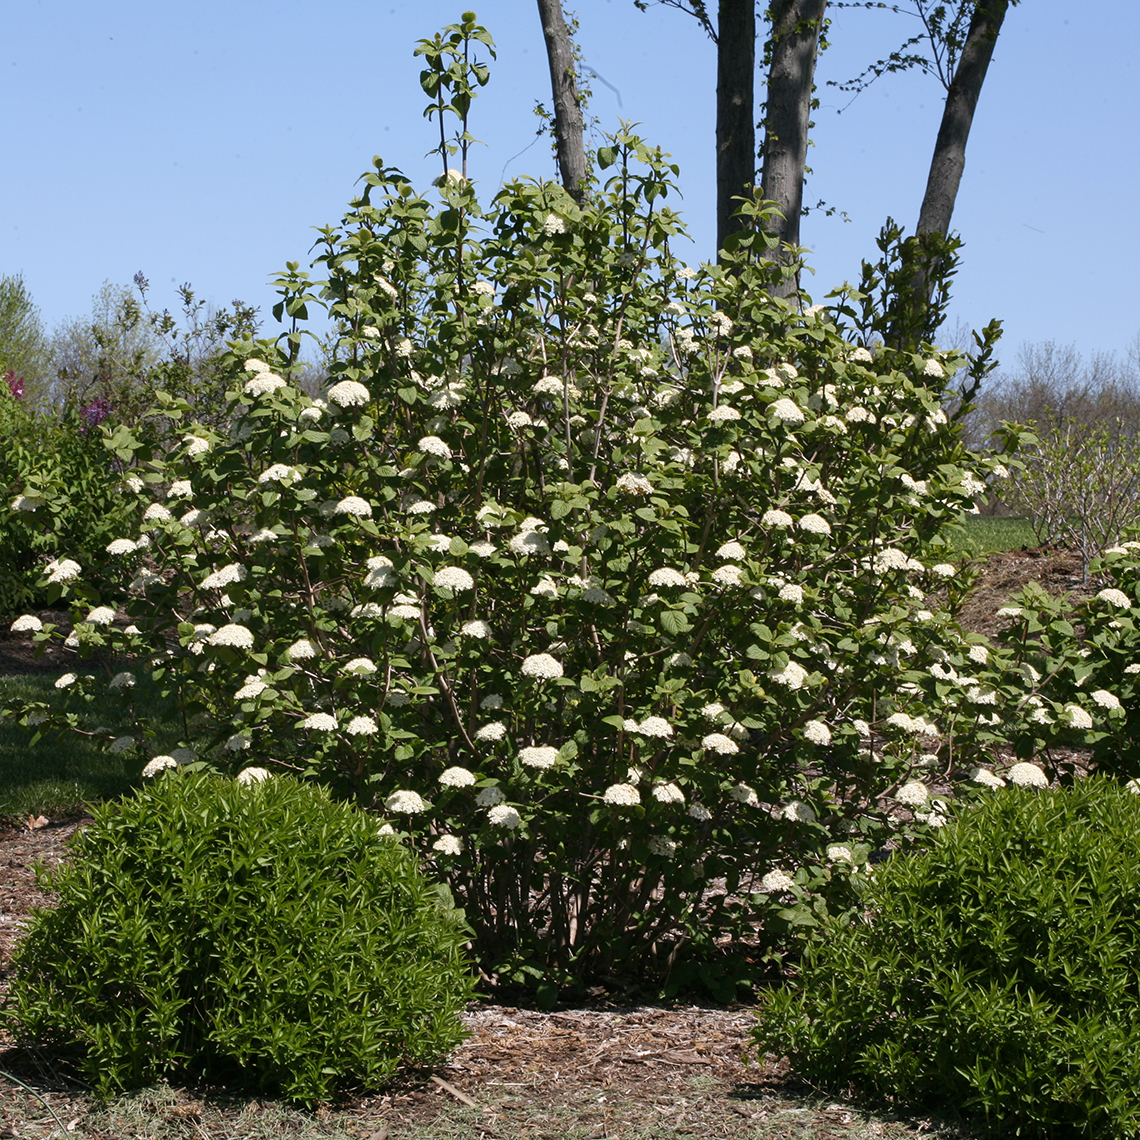 A large specimen of Red Balloon viburnum in full bloom with white flowers